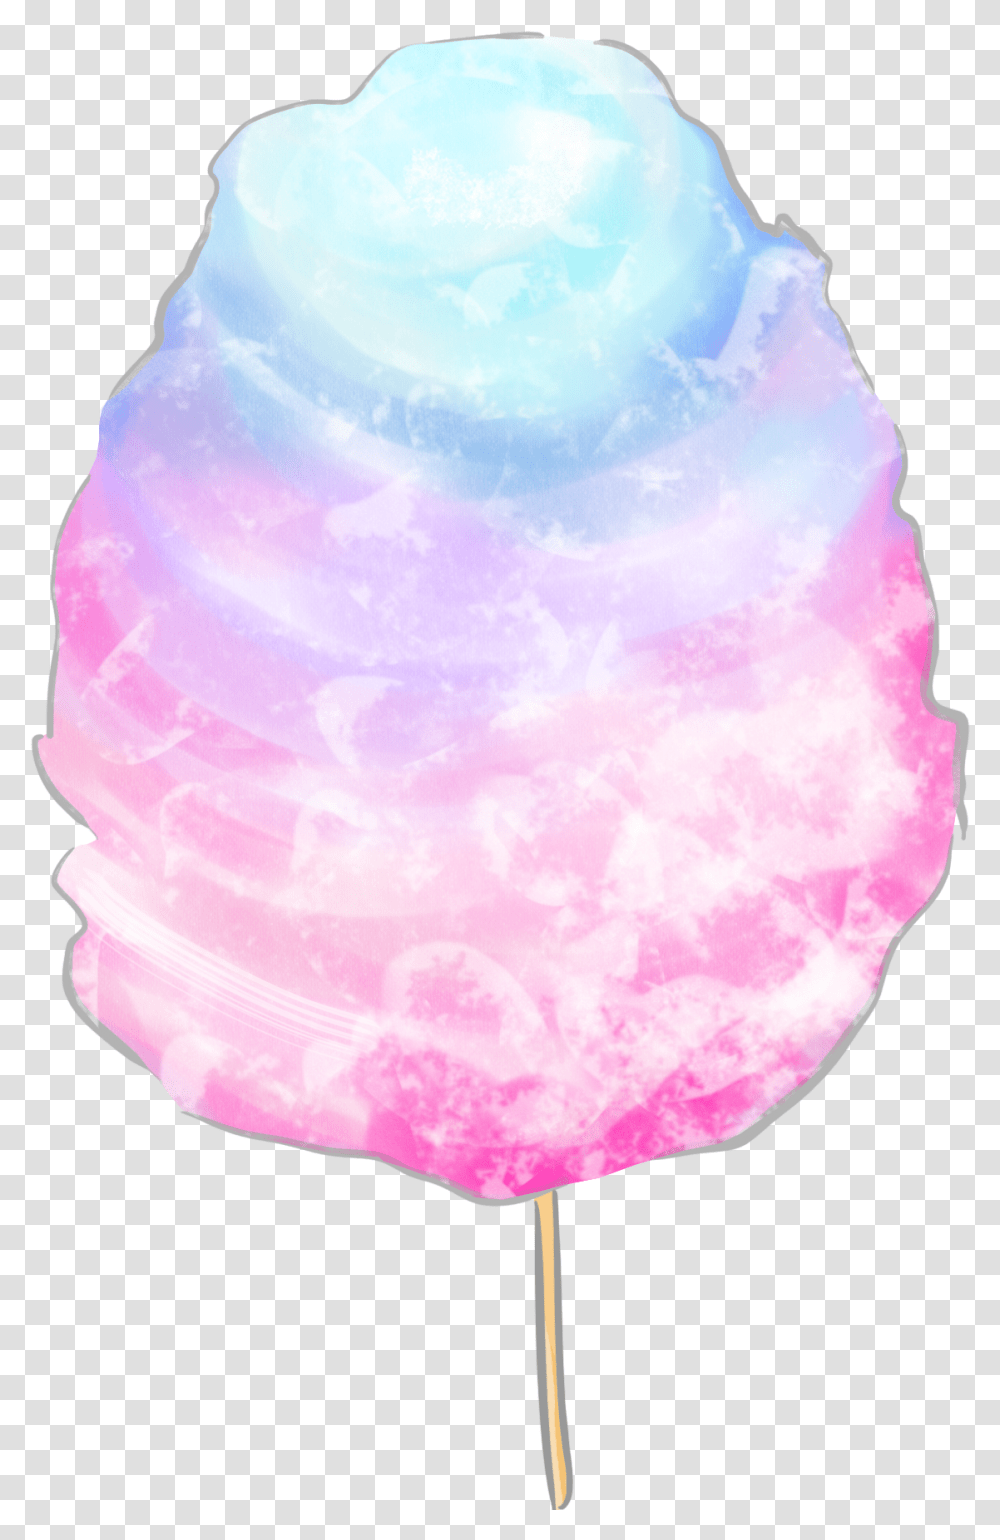 Cottoncandy Candyfloss Carnival Fairground Lollipop Cotton Candy, Crystal, Mineral, Lamp, Wedding Cake Transparent Png